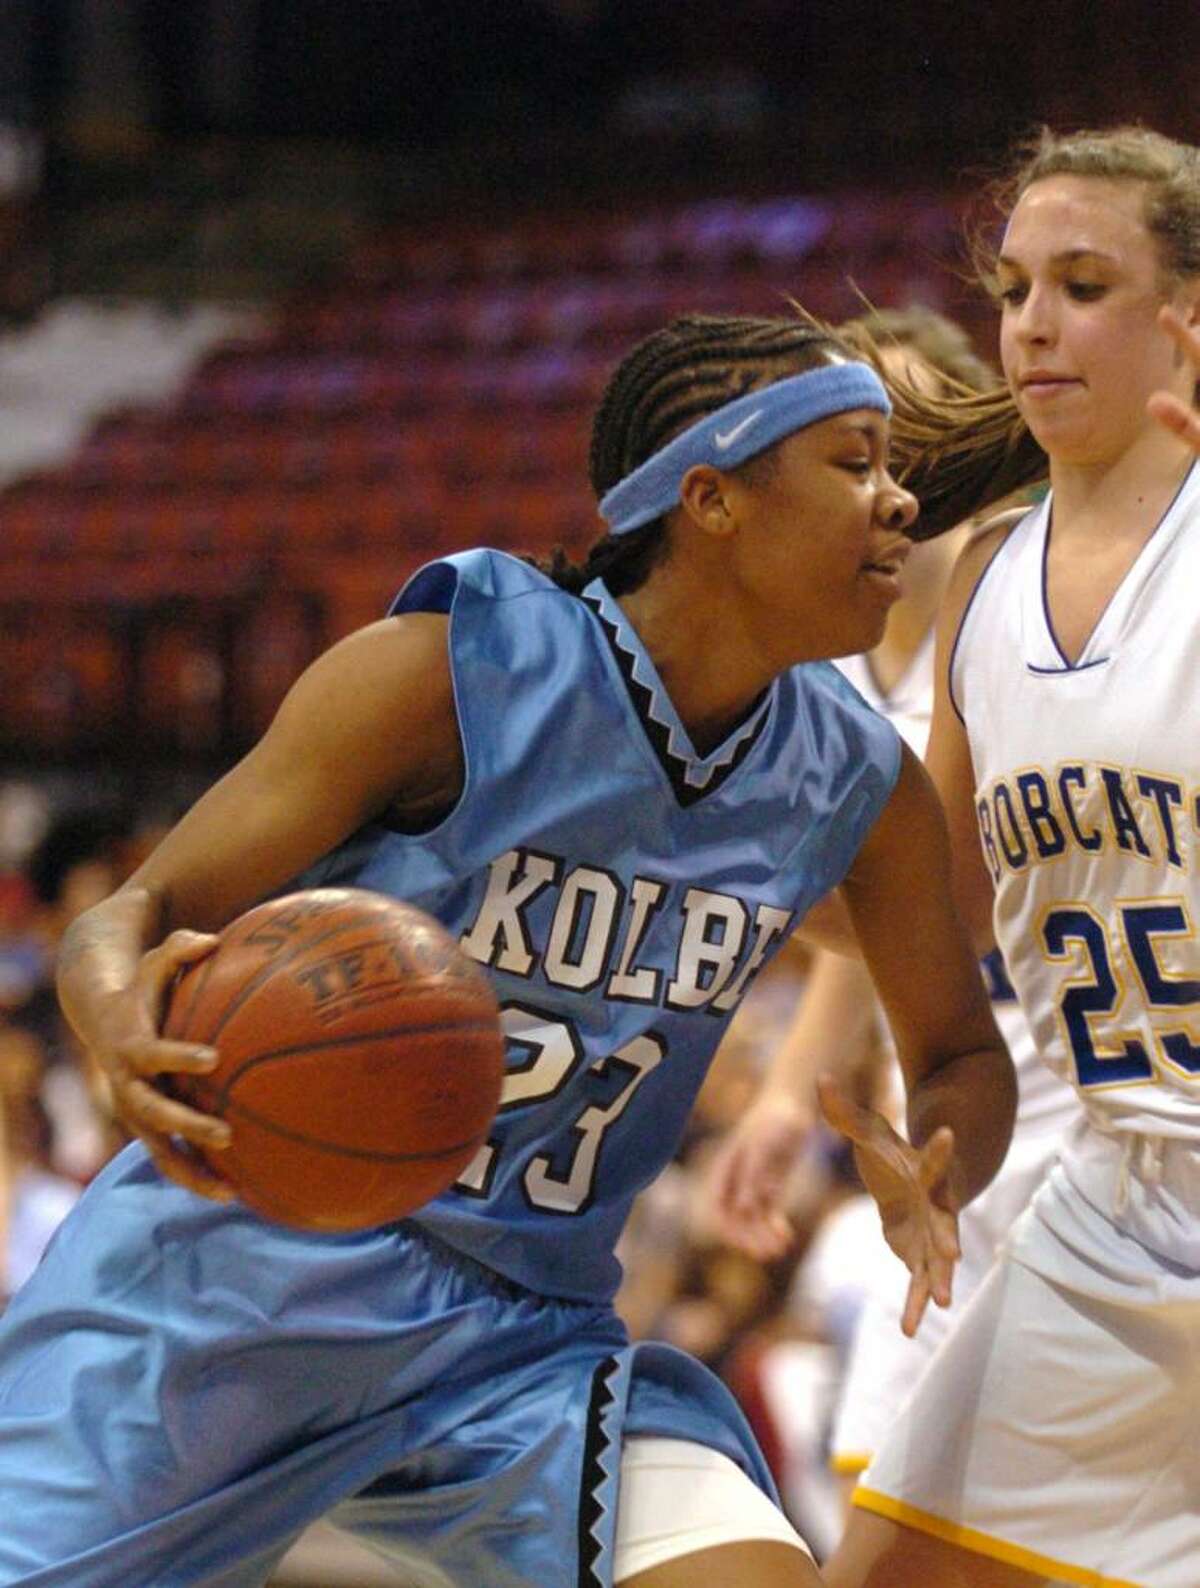 Kolbe's 23, Tiarrah Thompson trys for a basket while Brookfield's 25, Krista Melchione blocks during the championship girls basketball game at Mohegan Sun, Friday, March 19, 2010.